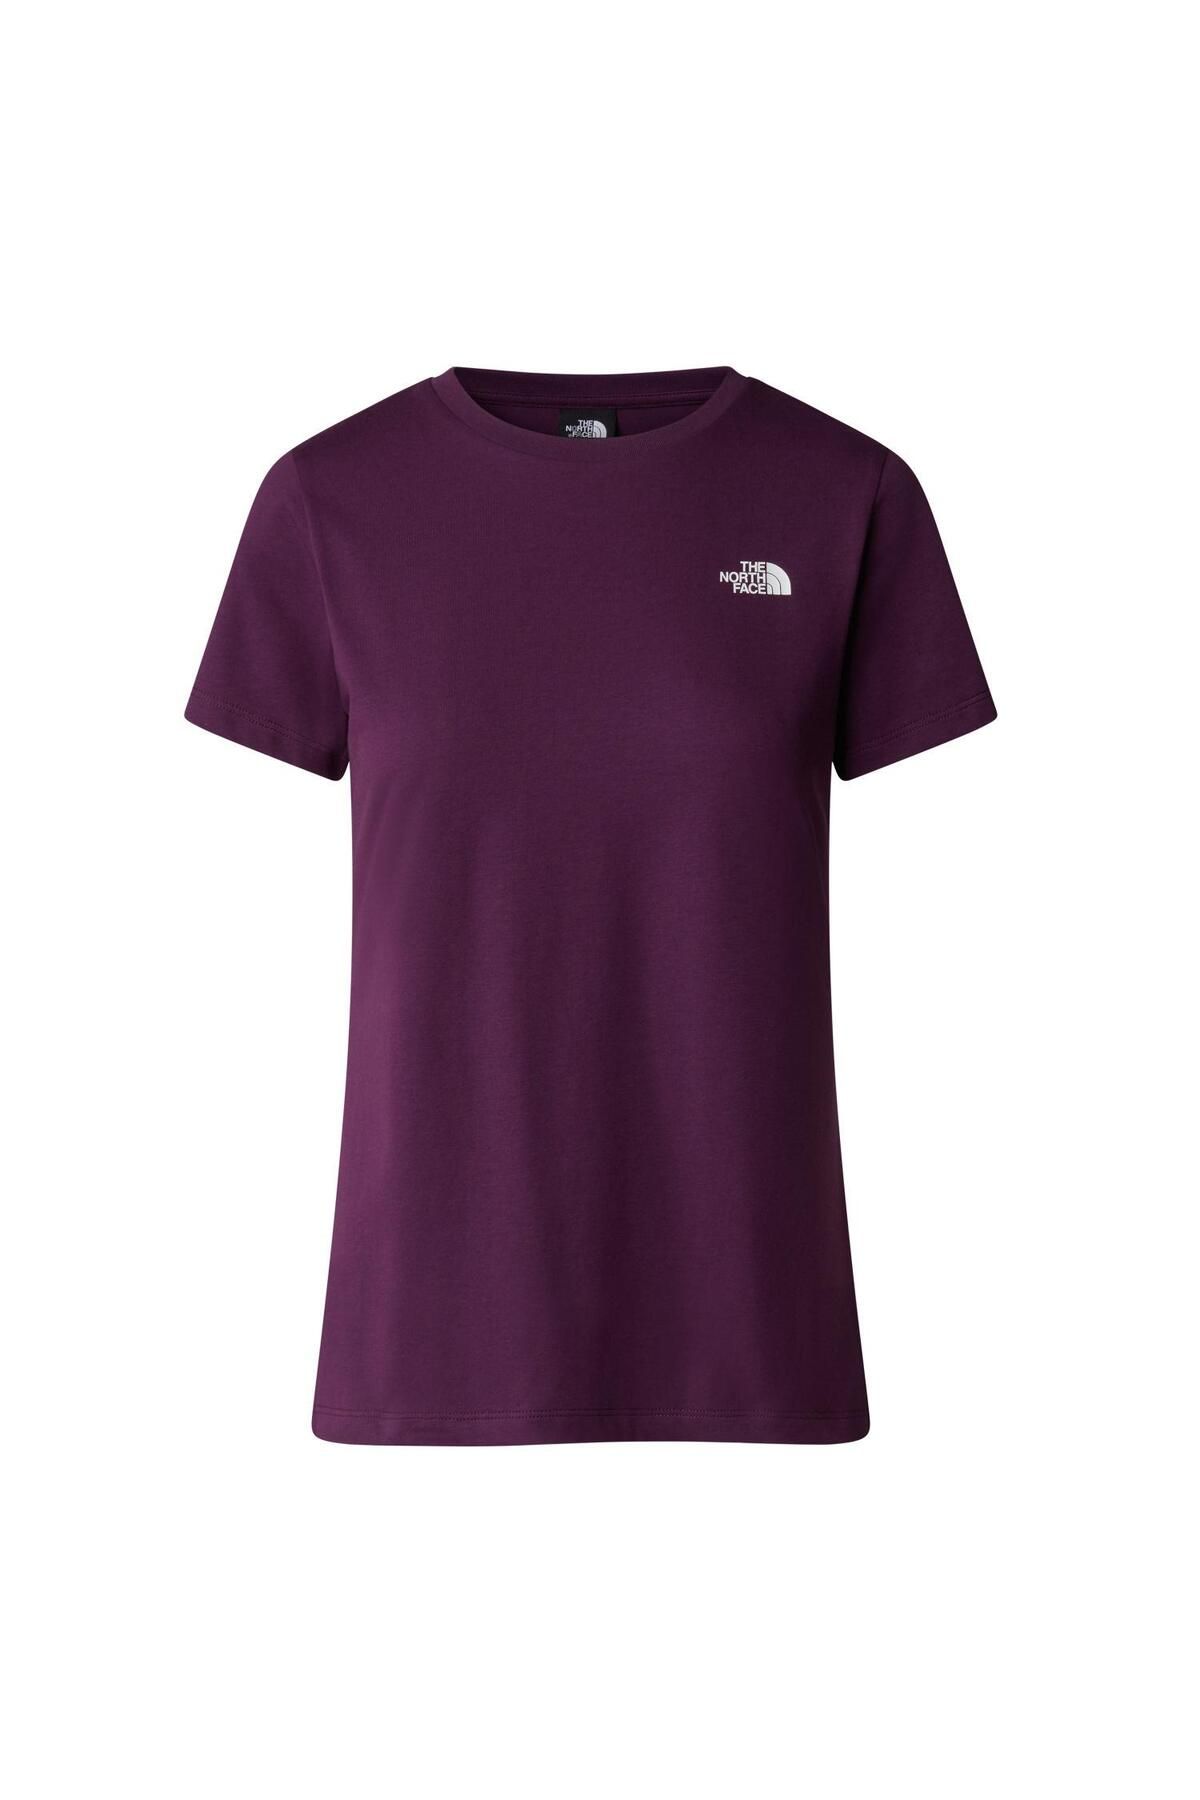 The North Face W S/S SIMPLE DOME SLIM TEE  T-Shirt NF0A87NHV6V1 Siyah-Mor-L